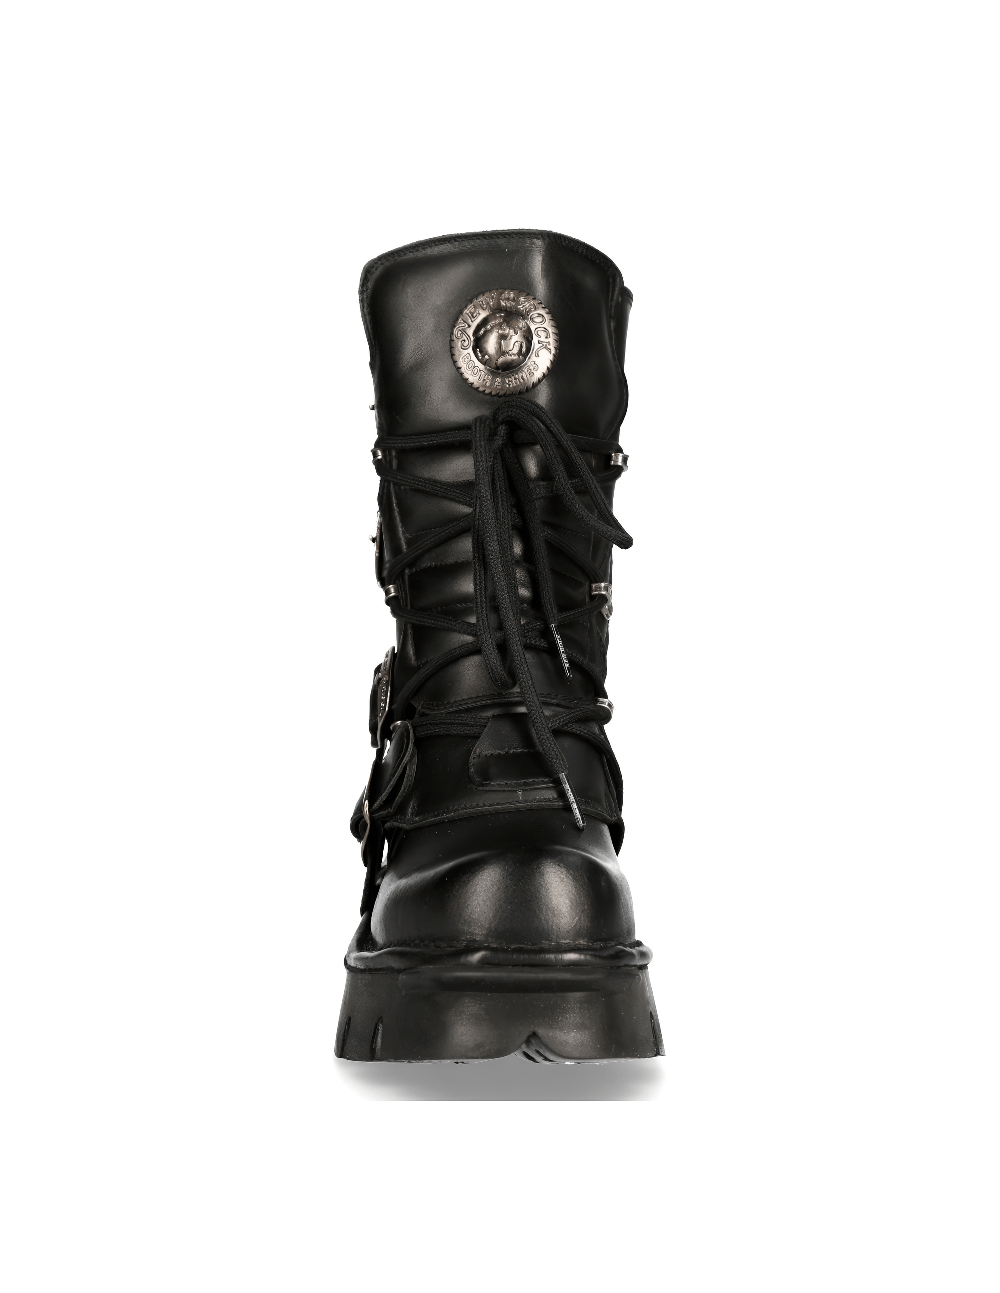 NEW ROCK Unisex Gothic Black Boots with Metallic Accents